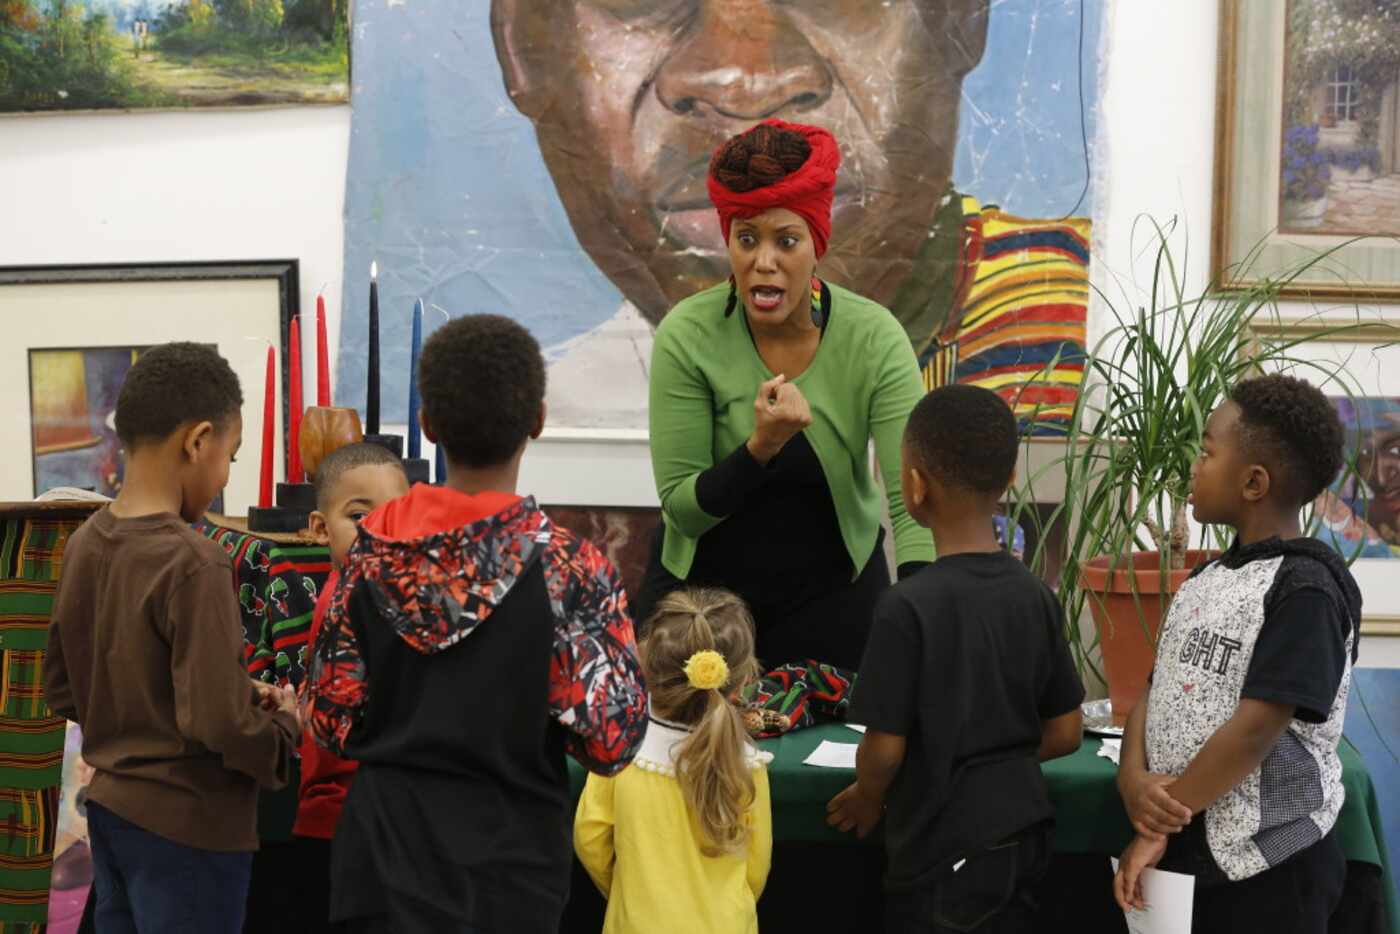 Renee Miche'al Jones, known as Sister Renee, taught the principles of Kwanzaa at Pan African...